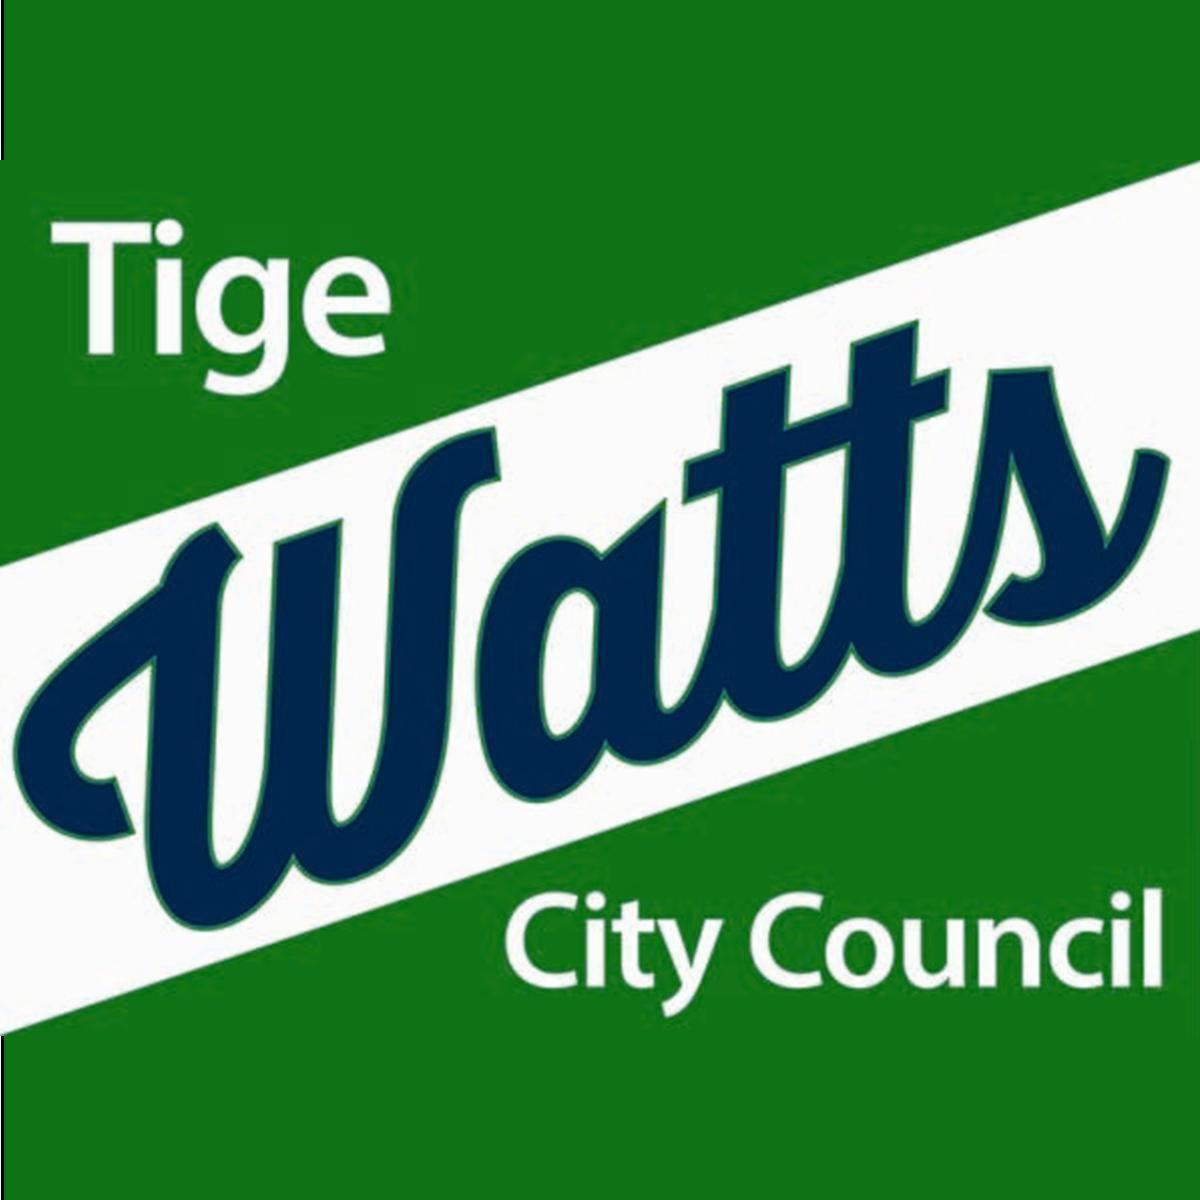 The official Twitter account for Tige Watts' campaign for Columbia City Council